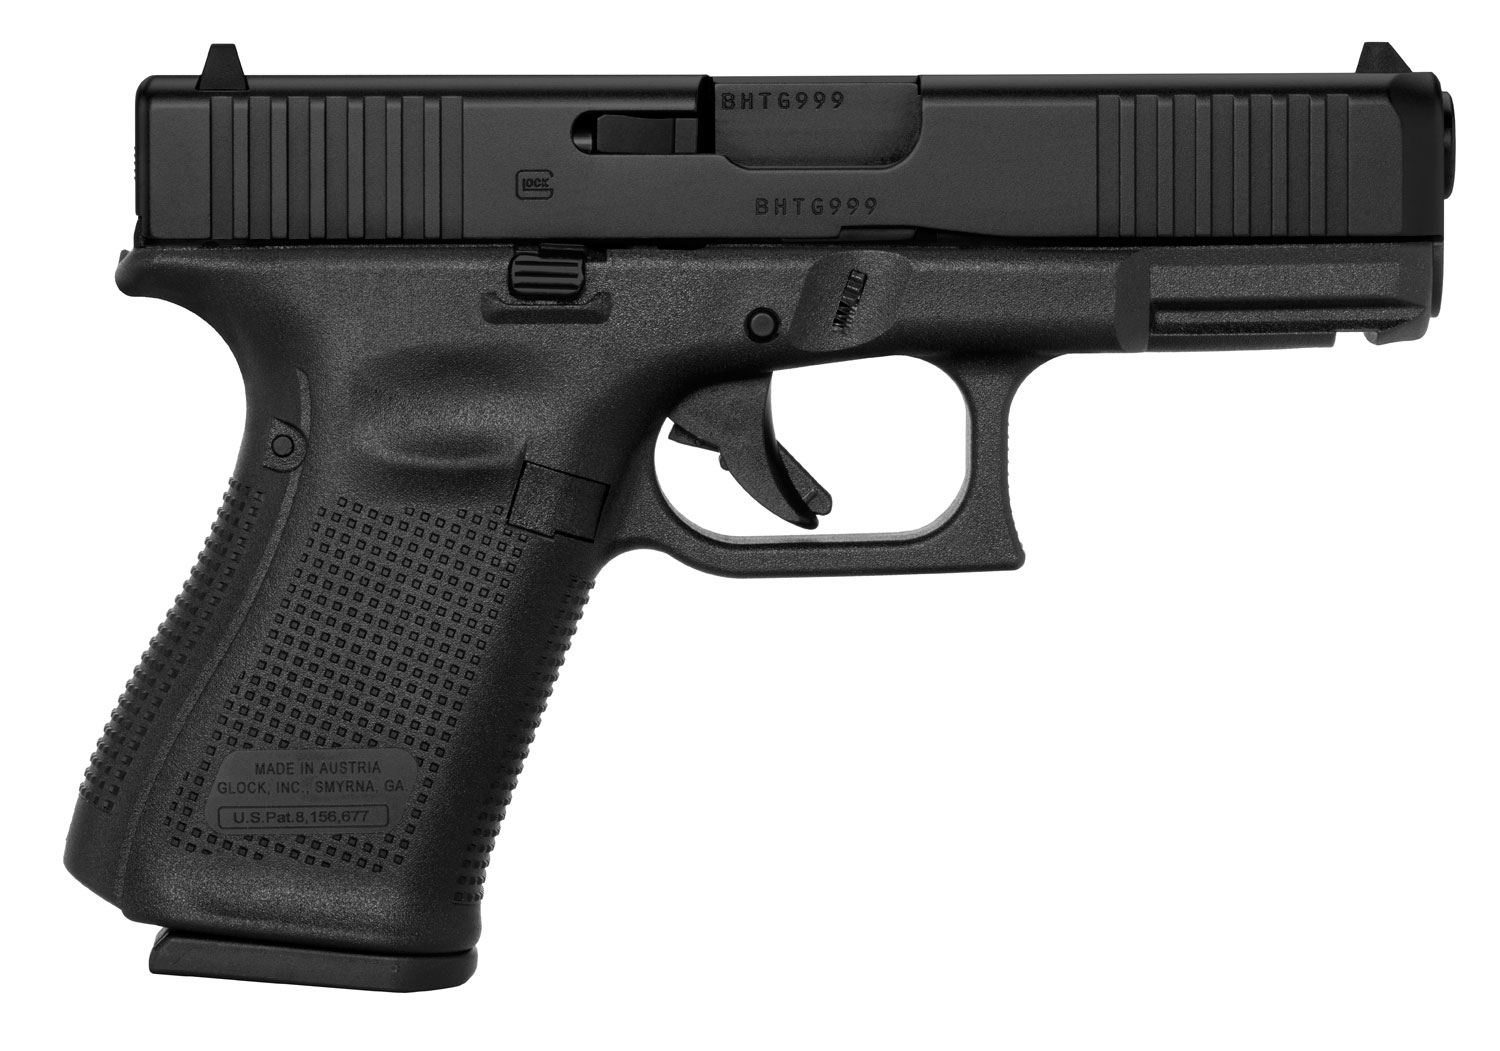 Glock PA195S201 G19 Gen5 Compact 9mm Luger 4.02